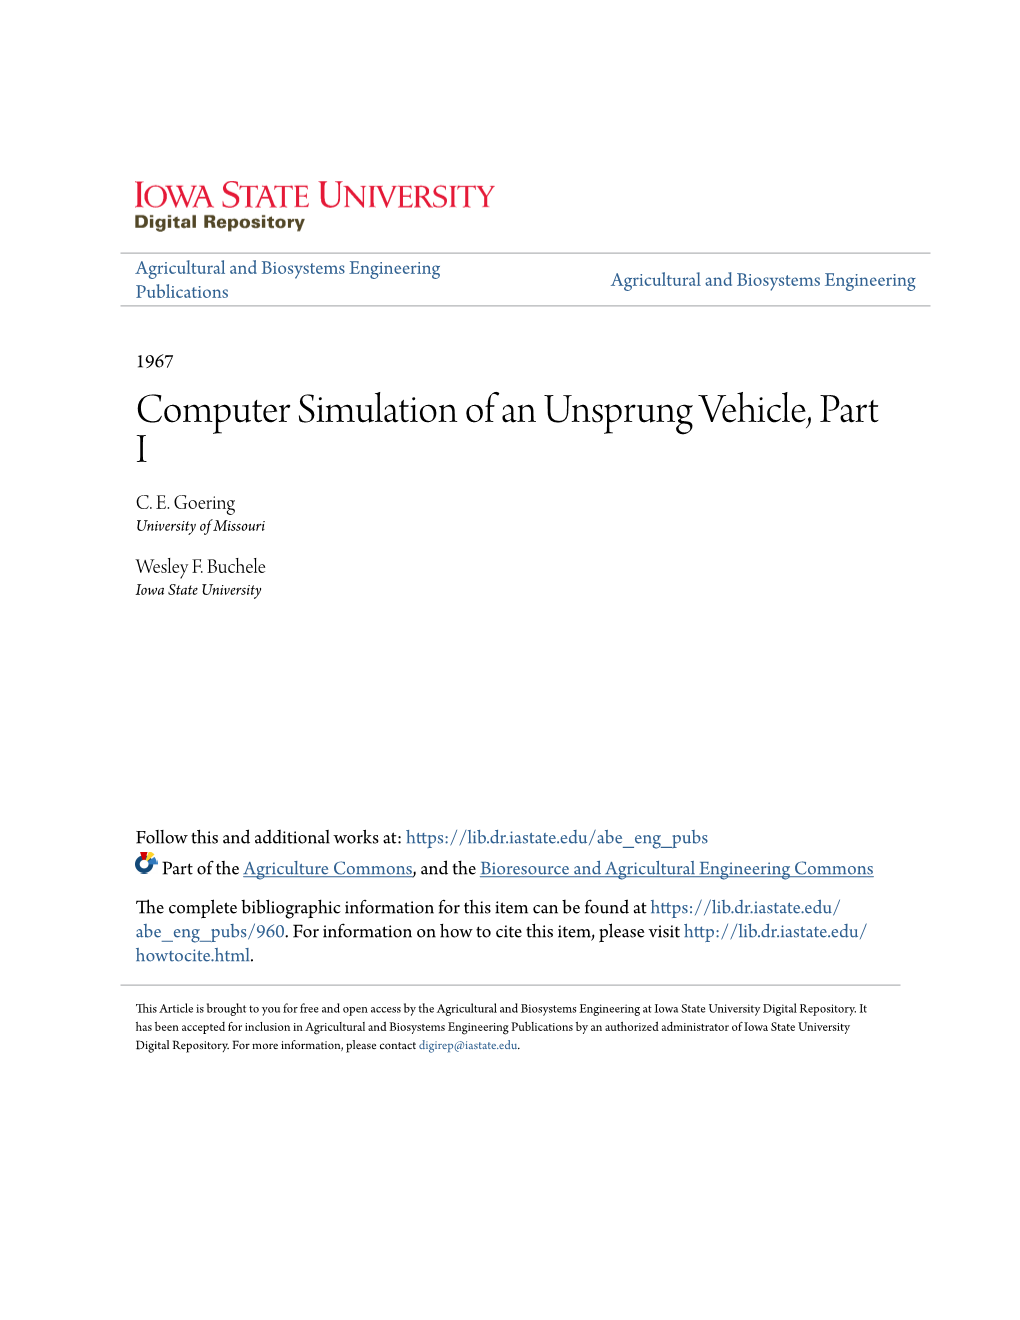 Computer Simulation of an Unsprung Vehicle, Part I C